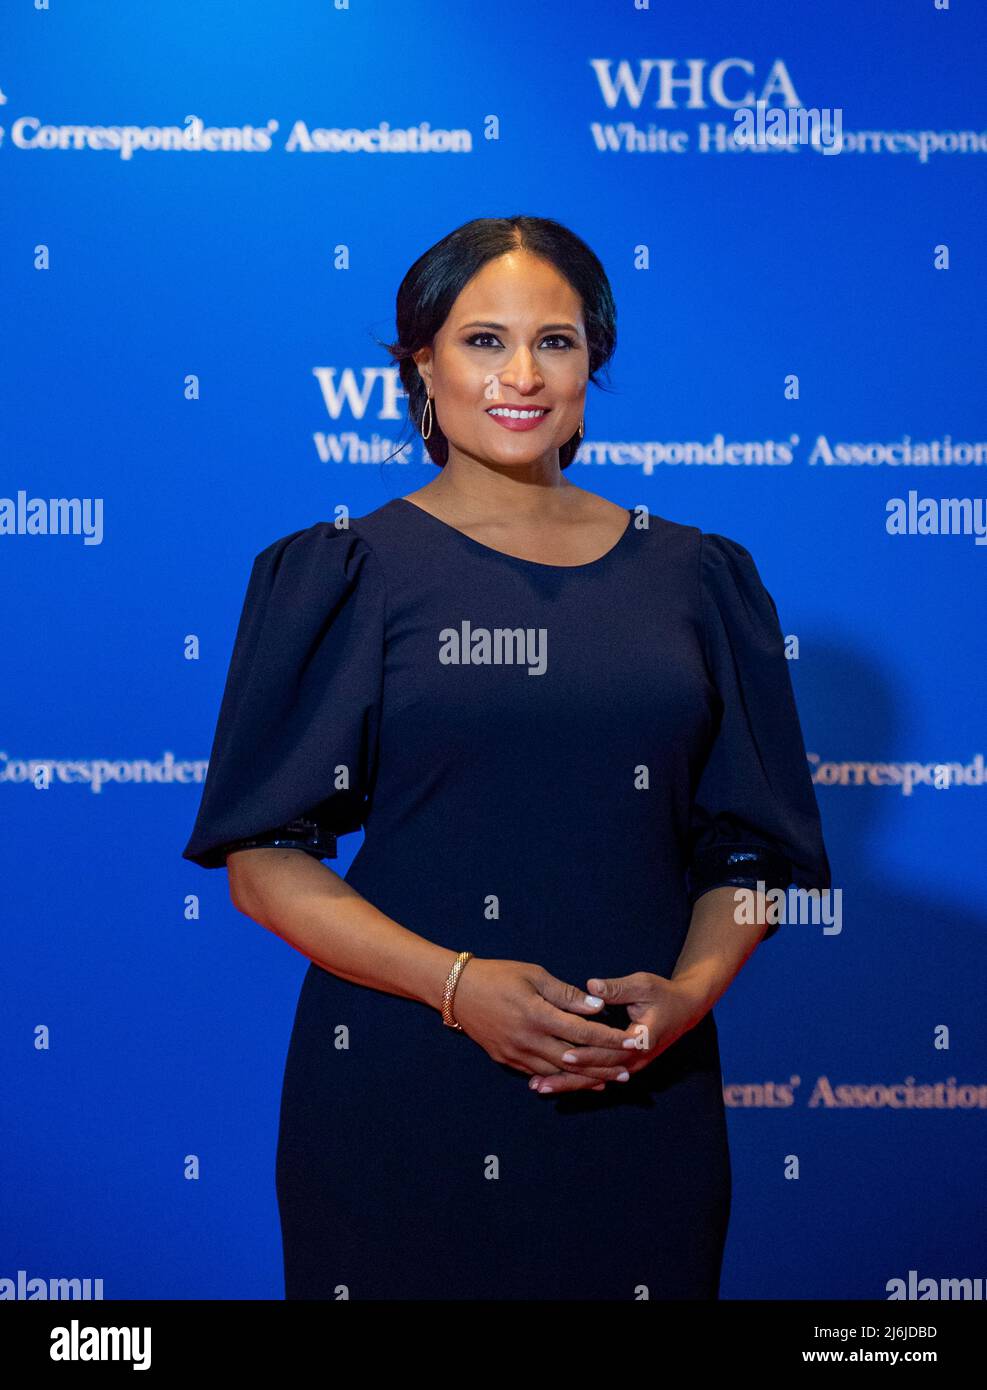 Kristen Welker arrives for the 2022 White House Correspondents Association Annual Dinner at the Washington Hilton Hotel in Washington, DC on Saturday, April 30, 2022.  This is the first time since 2019 that the WHCA has held its annual dinner due to the COVID-19 pandemic. Credit: Rod Lamkey / CNP/Sipa USA Stock Photo